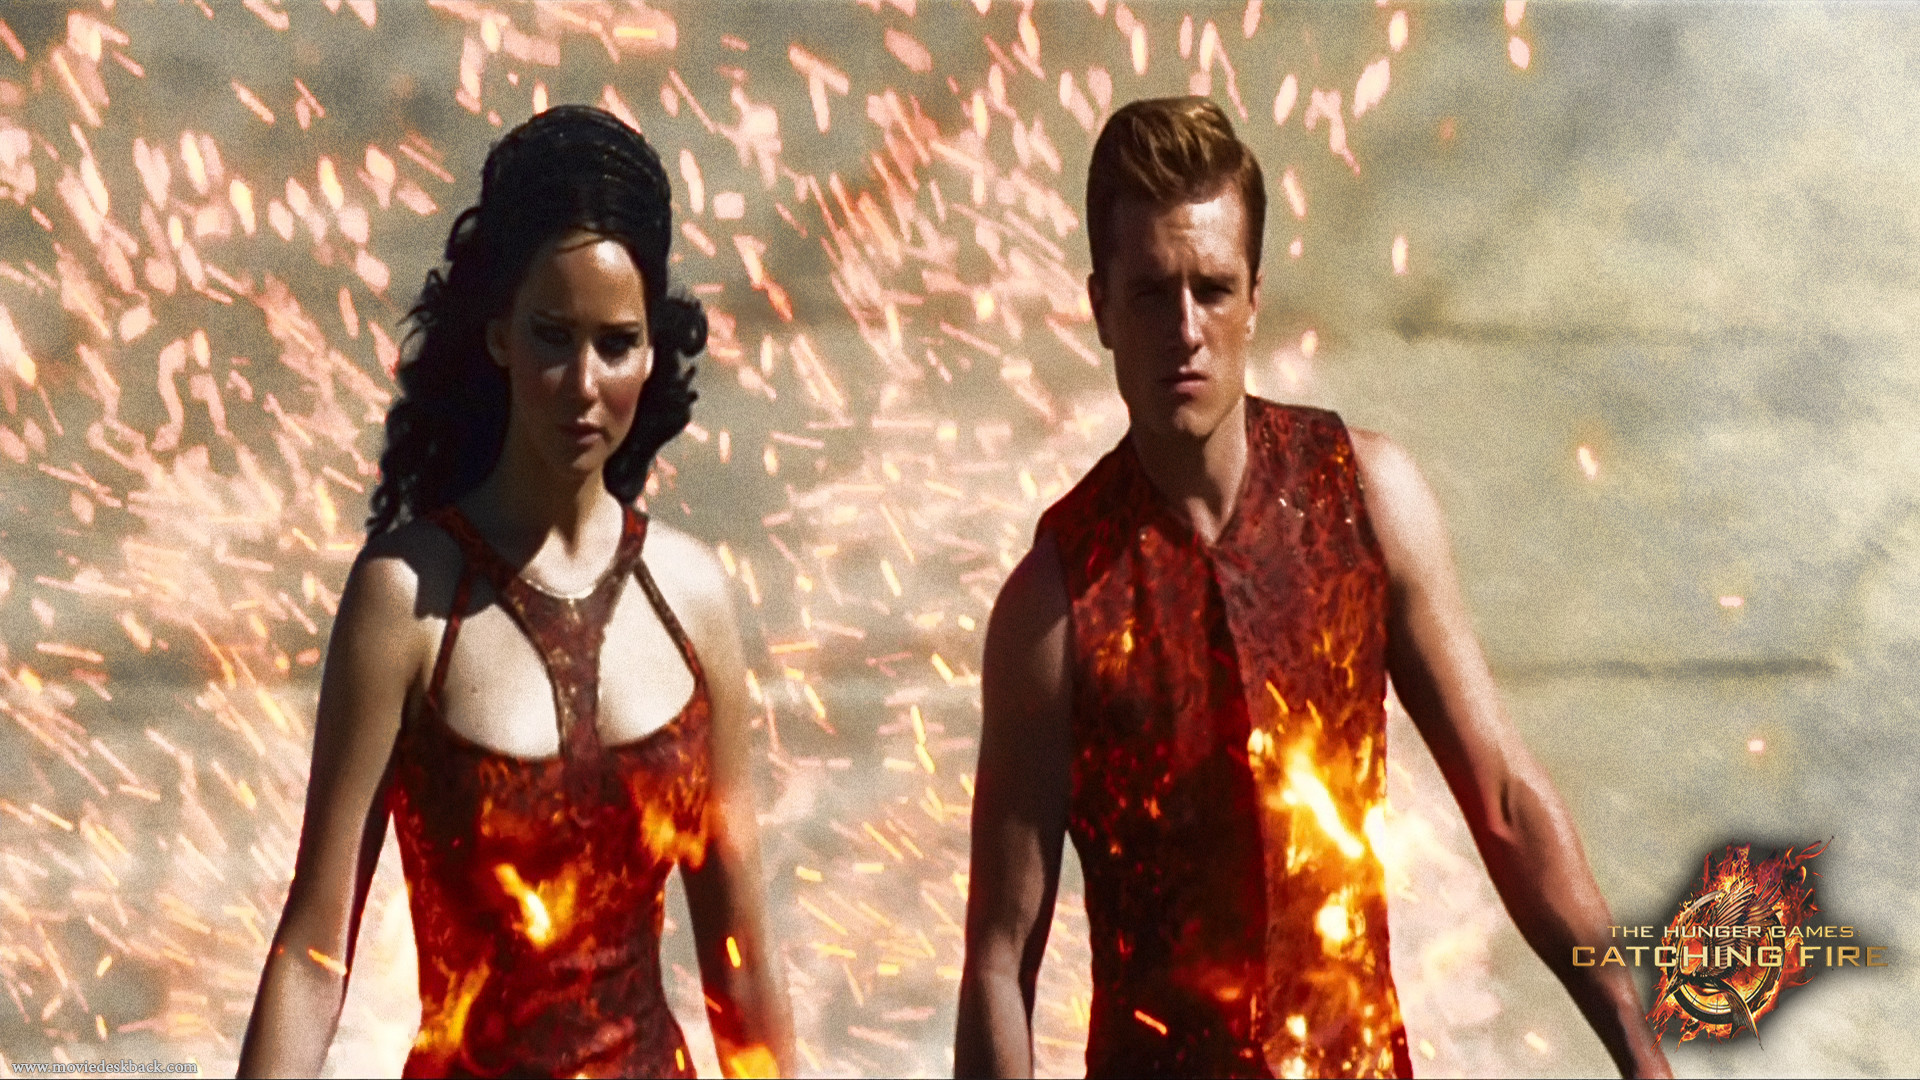 1920x1080 katniss opening ceremony outfit catching fire - Google Search | Story:  10,000 Fires (Camp NaNo 7-14) | Pinterest | Catching fire